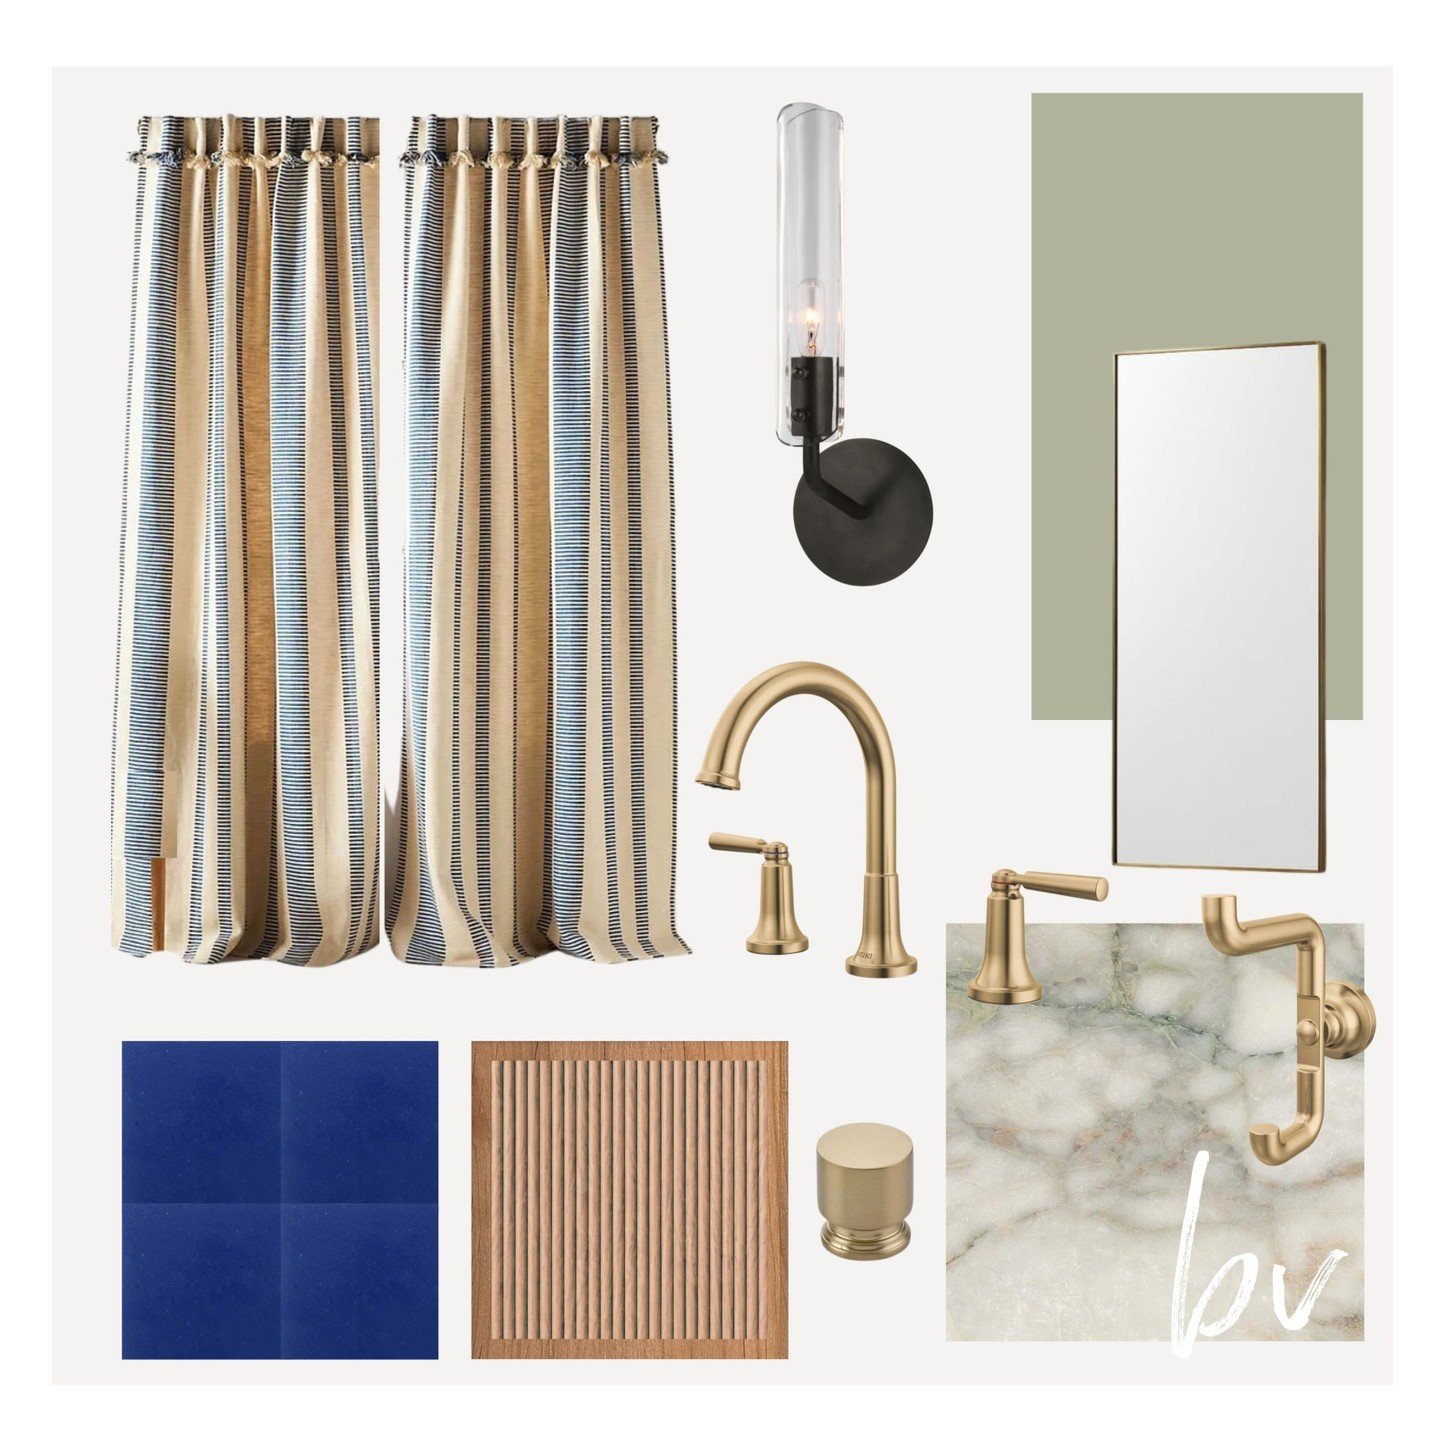 Meet pretty bathroom project /terrible client who can't make up her mind.  She is holding up the show because she doesn't have time to pick out a slab.  And her name is me. 

It's going to be beautiful...someday.

#MoodboardMonday #BathroomDesign #In